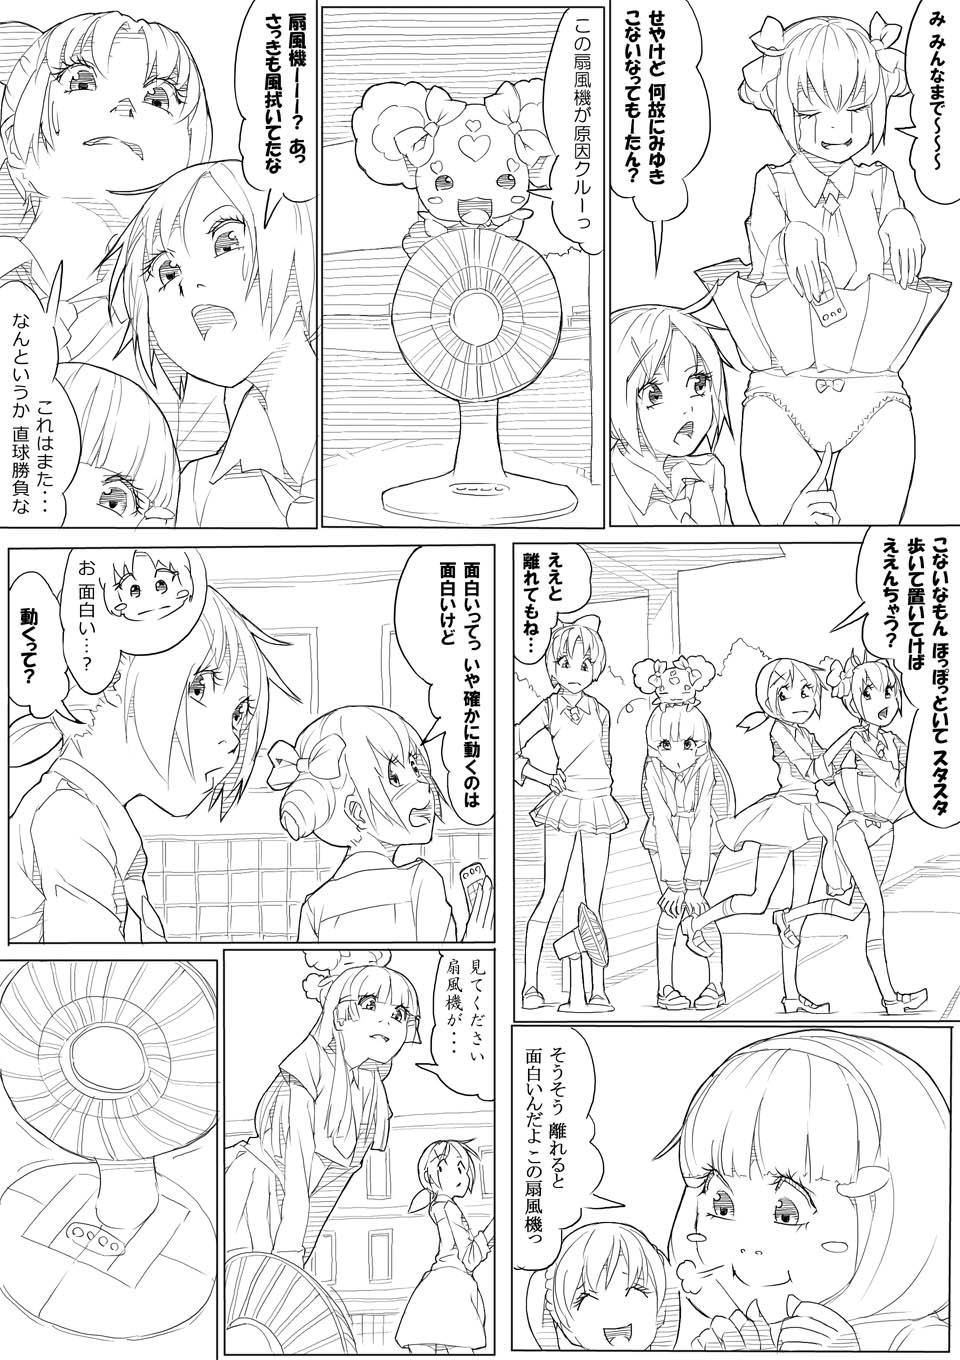 Hugetits スマプリ＋α - Smile precure Petite Girl Porn - Page 11